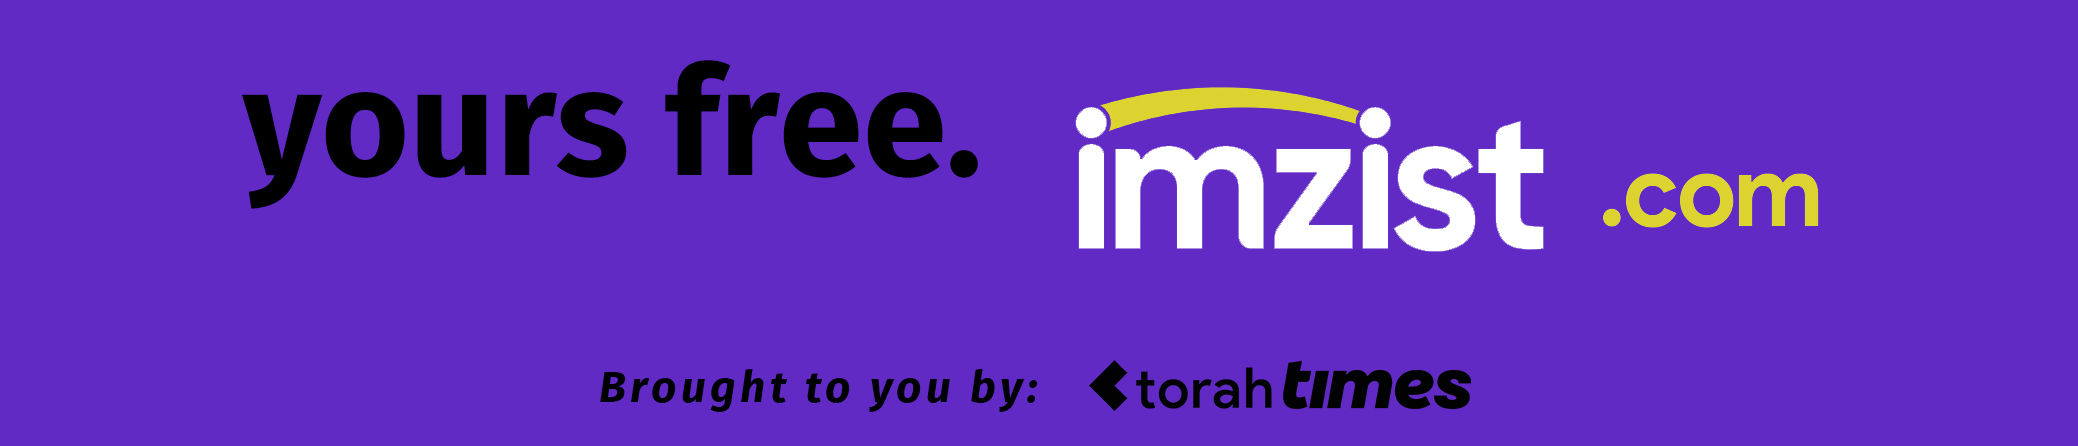 yours free. www.imzist.com. brought to you byy: The Torah Times